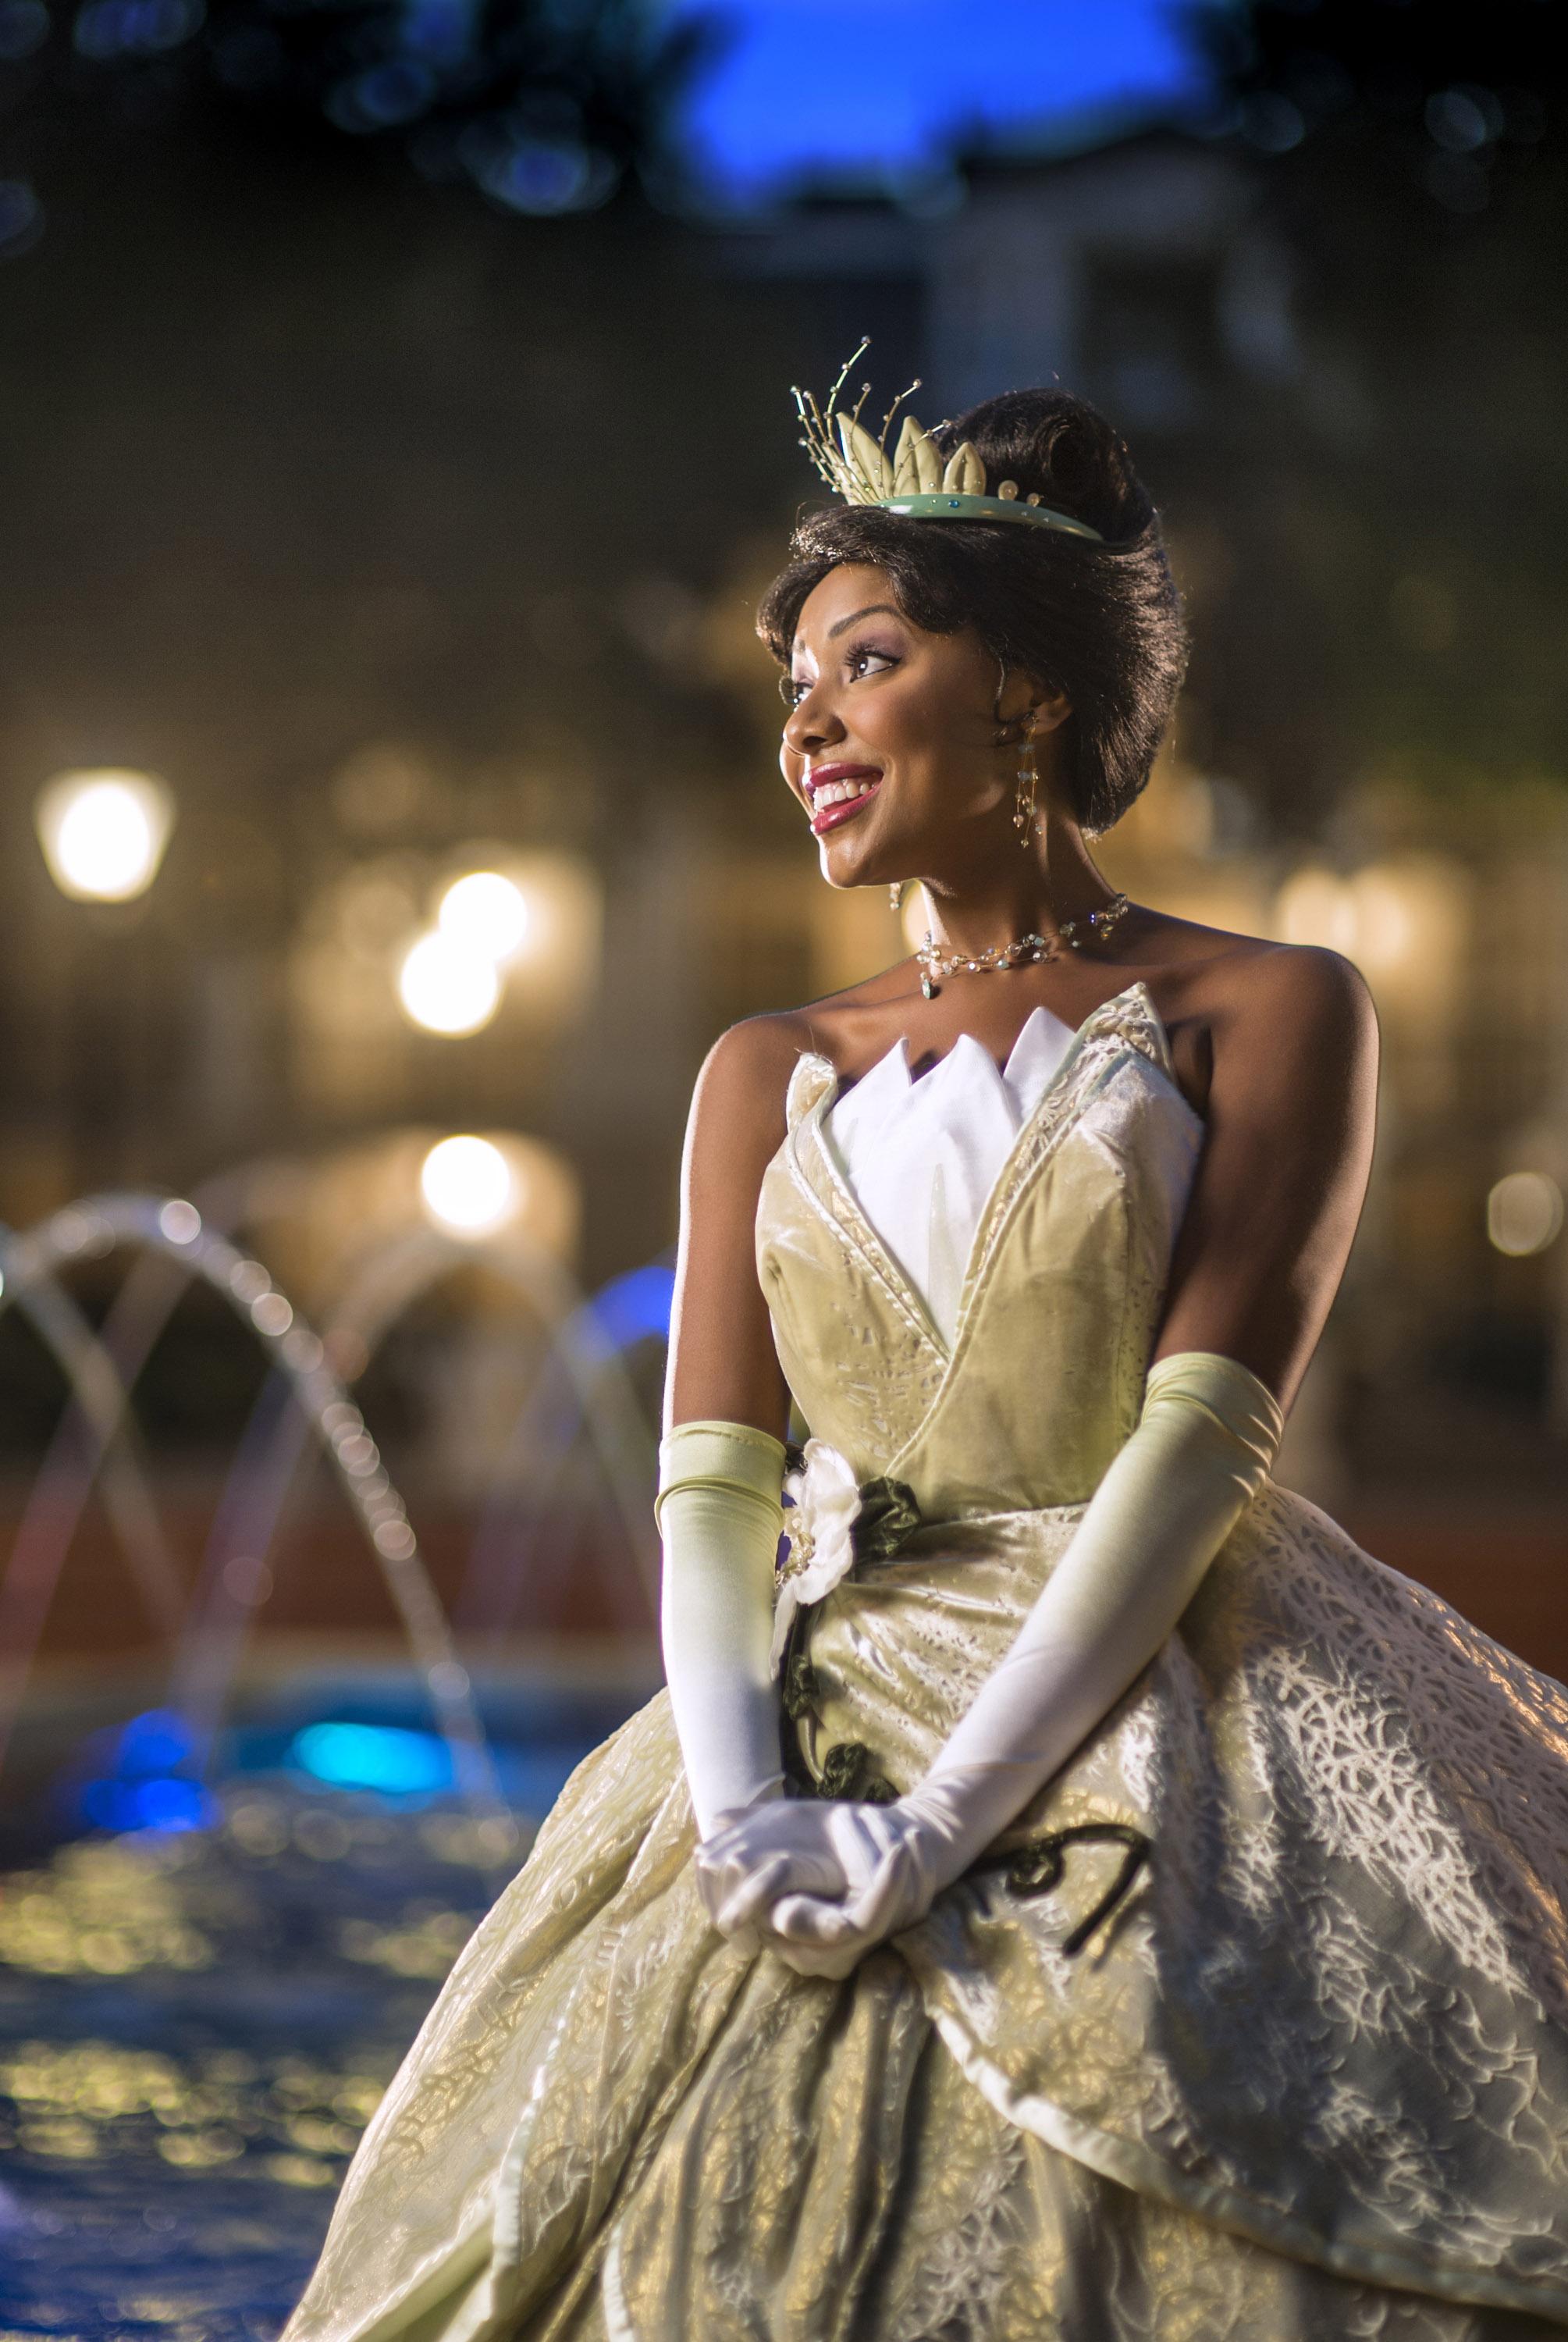 Special Image of Tiana from 'The Princess & The Frog'. Disney